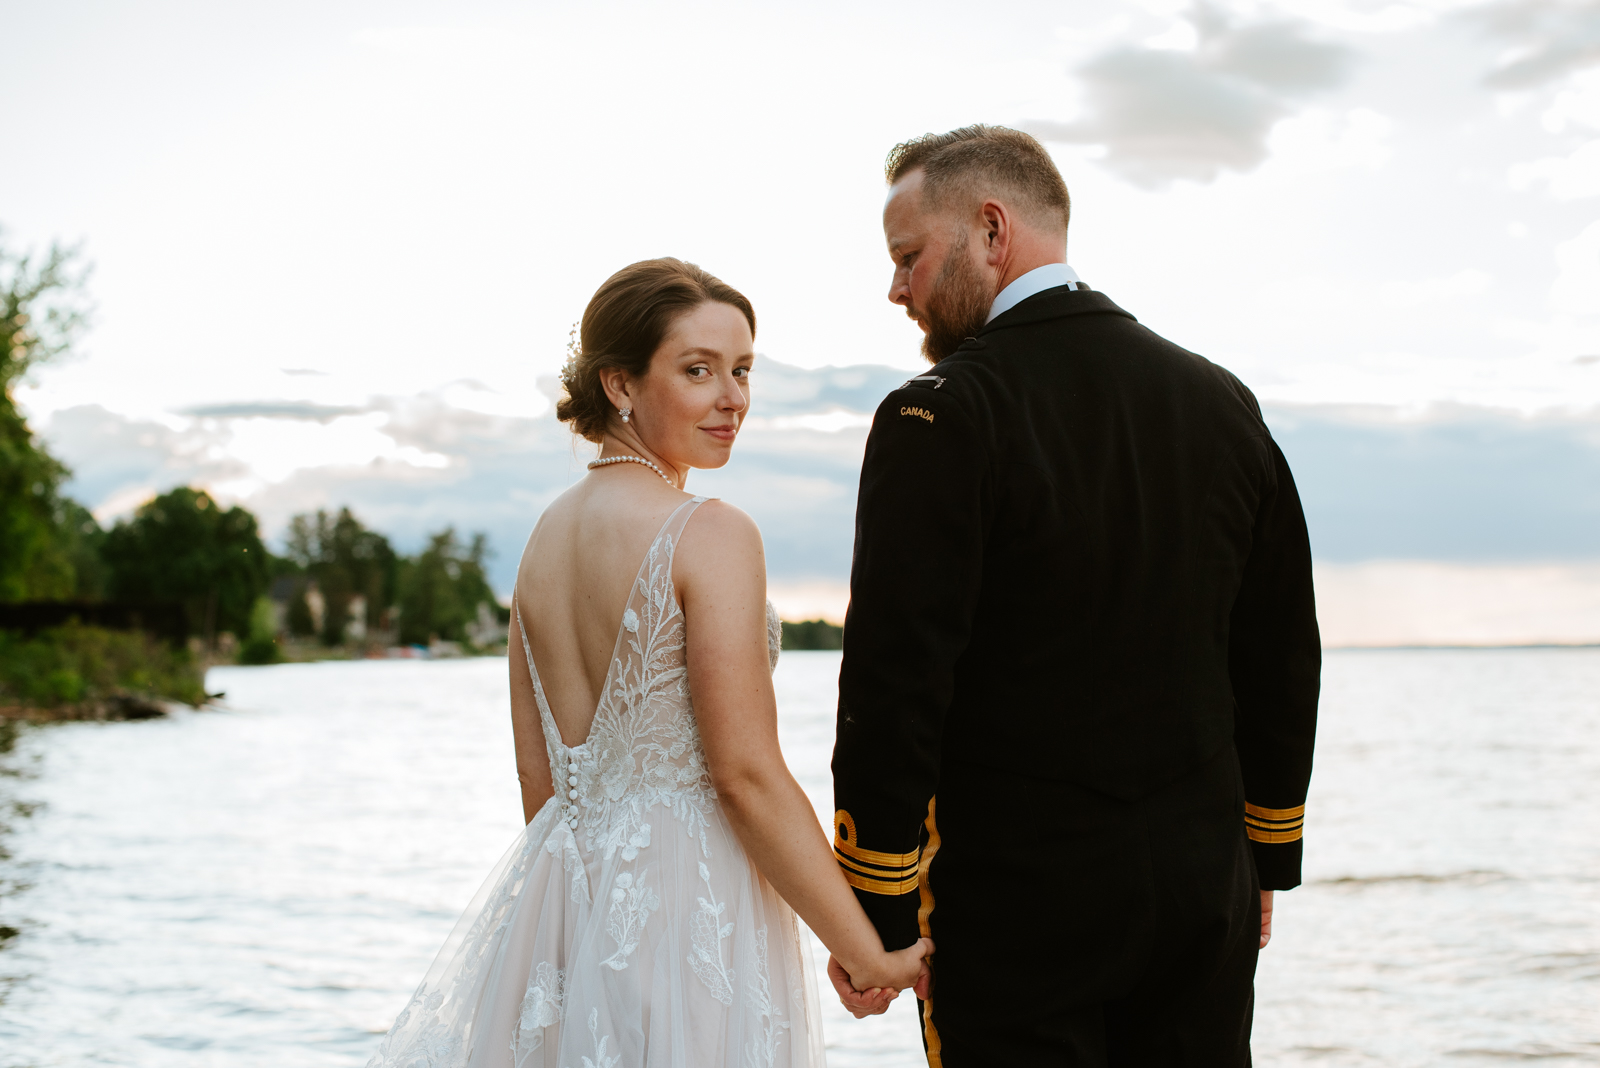 bride and groom wearing navy uniform by the water at sunset